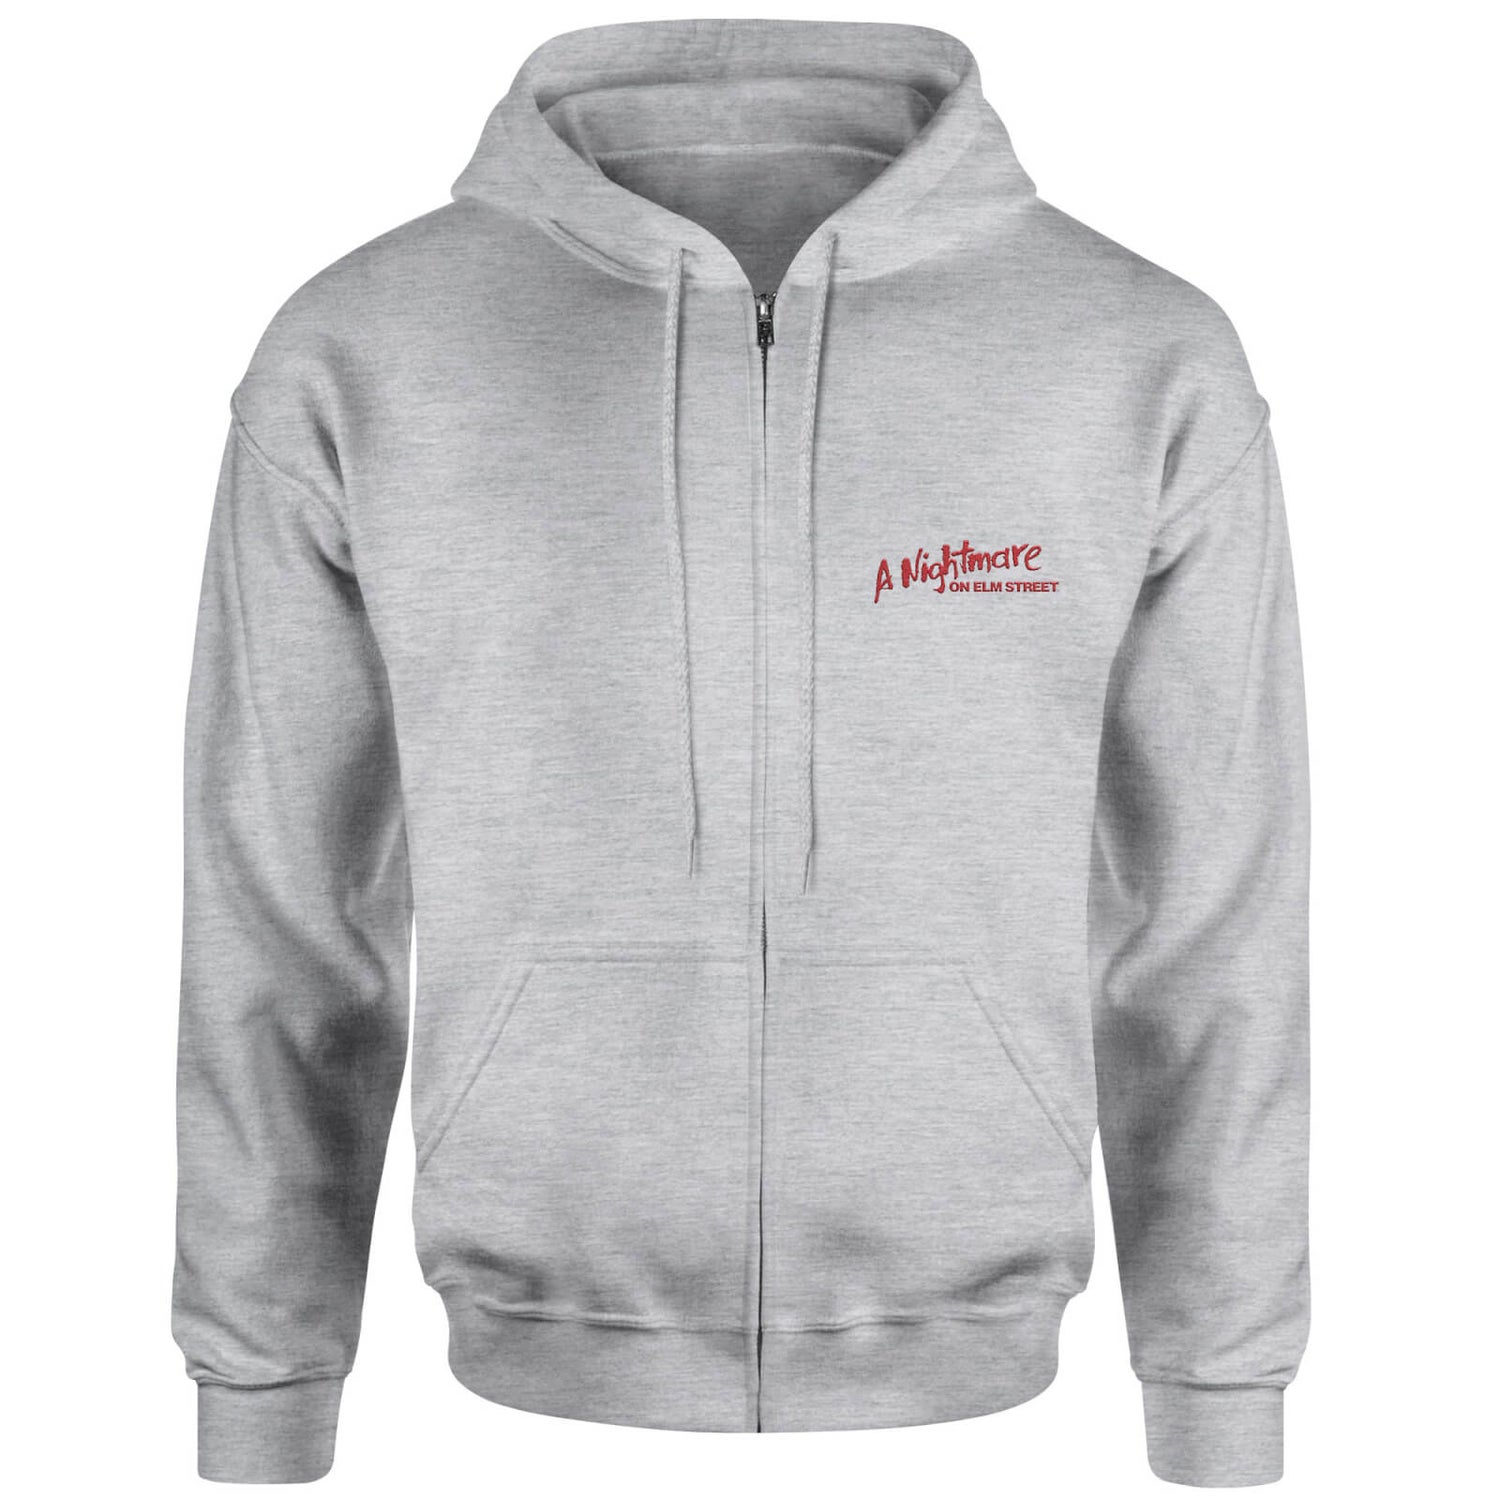 A Nightmare On Elm Street Embroidered Unisex Zipped Hoodie - Grey